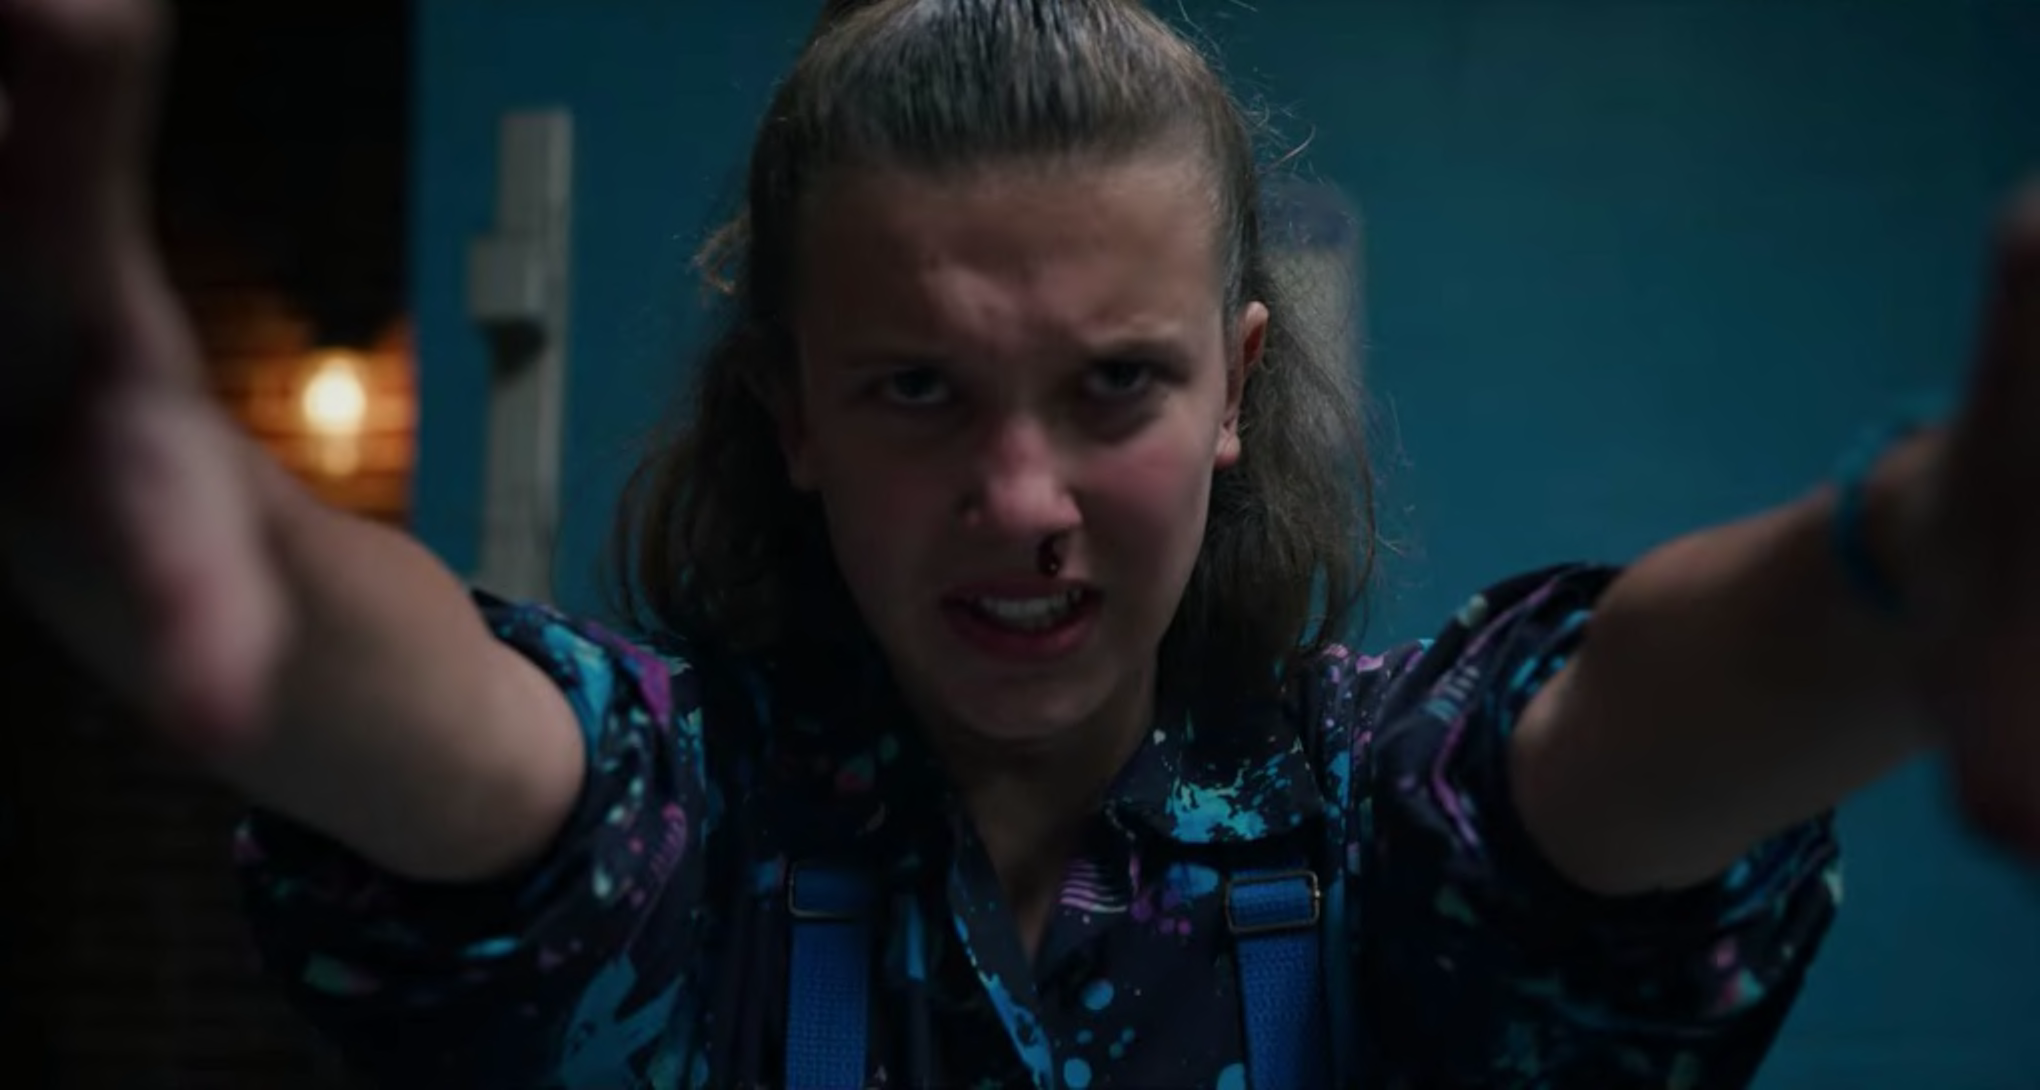 11 unanswered questions we have after seeing Stranger Things season 3 -  Page 5